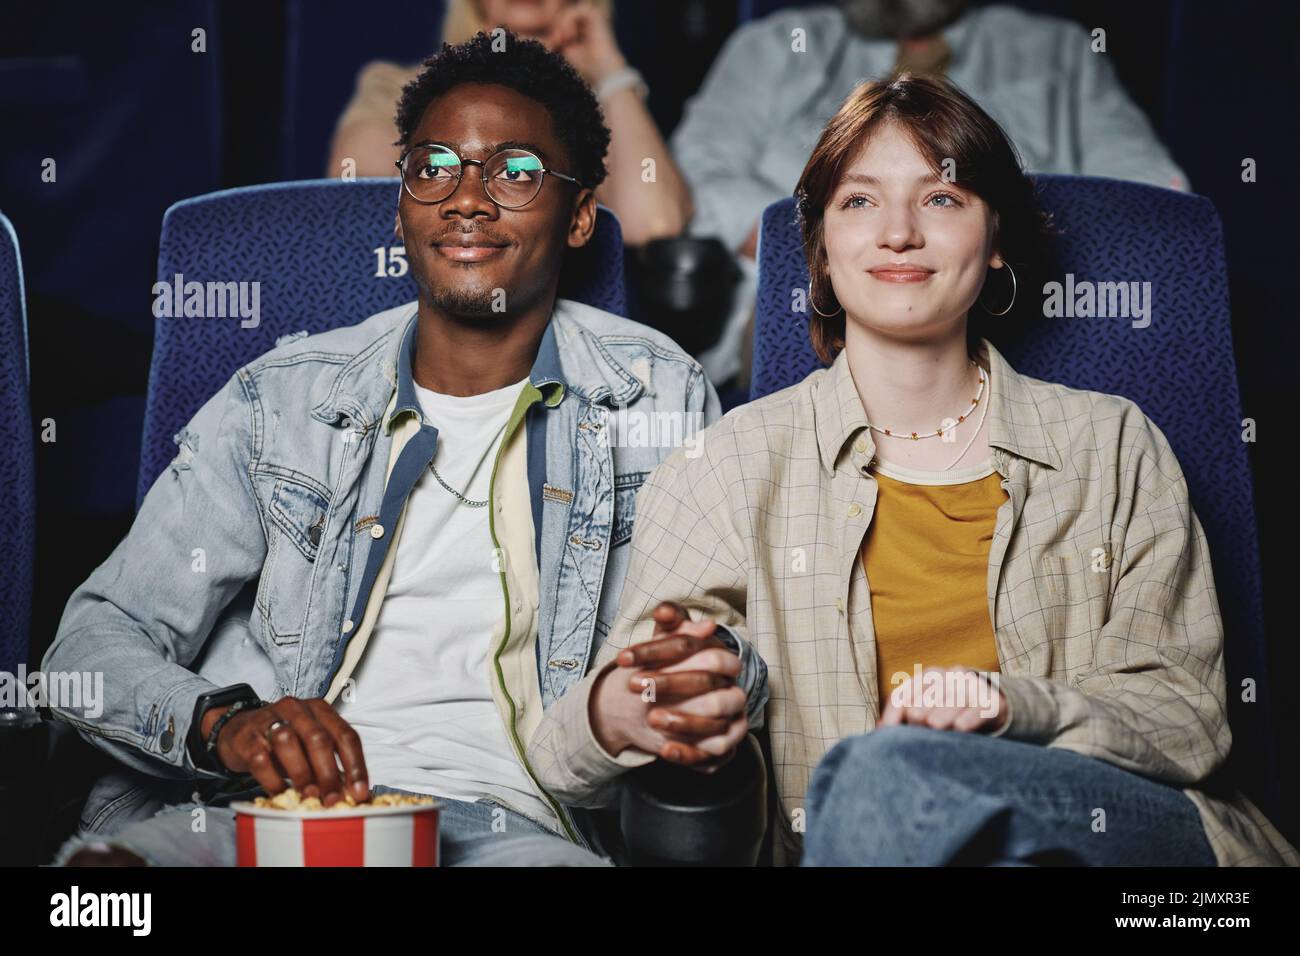 Joyful African American man and Caucasian woman in love having date at cinema watching movie and holding hands Stock Photo